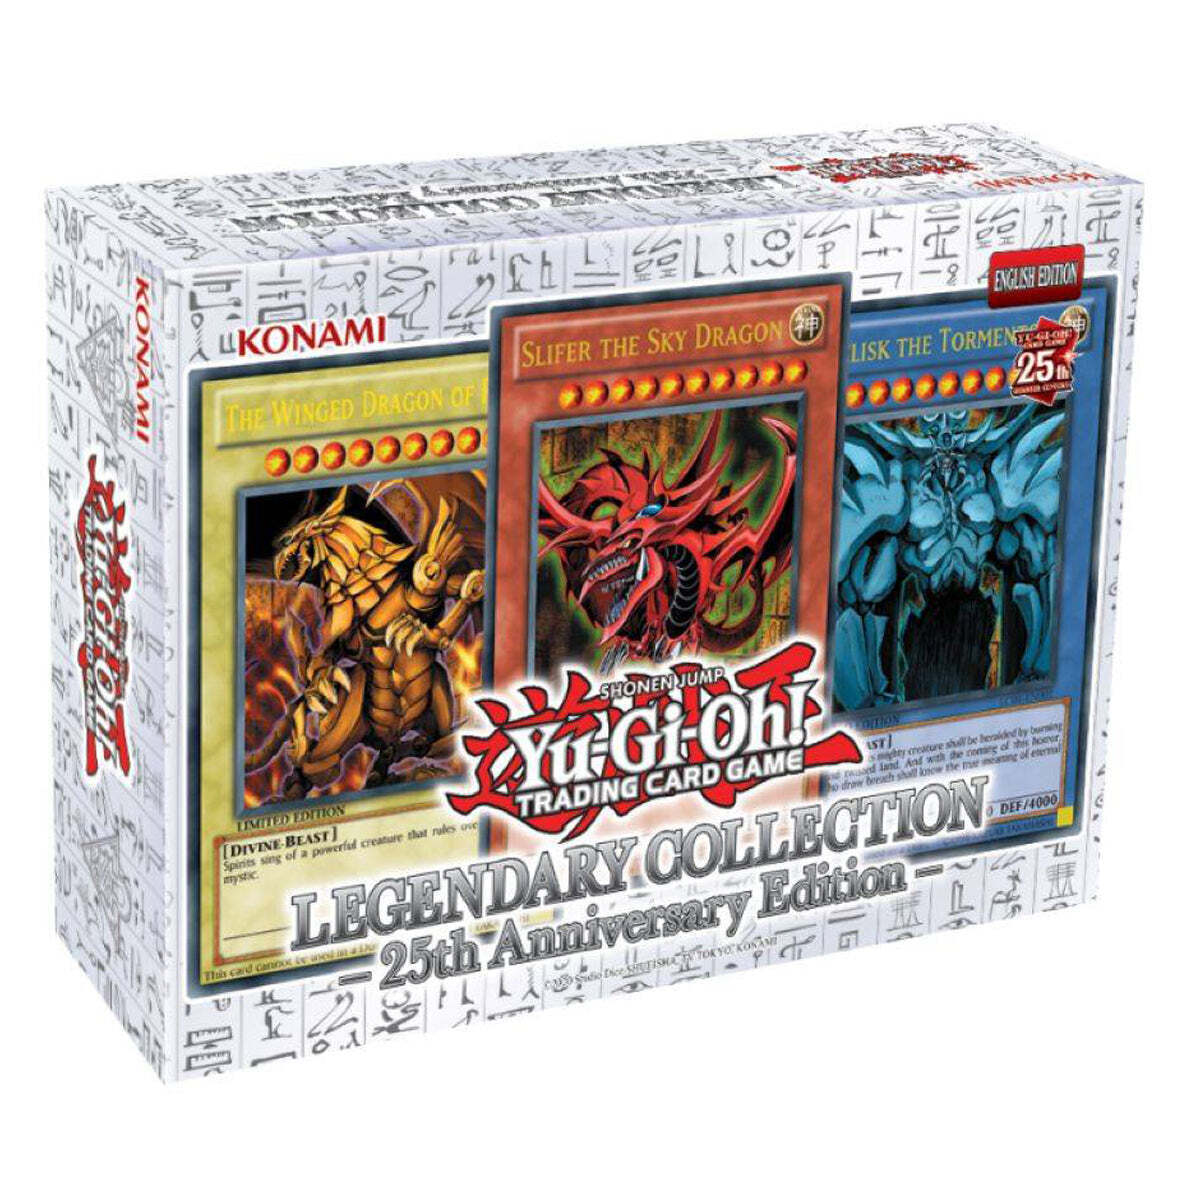 YUGIOH TRADING CARD GAME 25TH ANNIVERSARY EDITION LEGENDARY COLLECTION